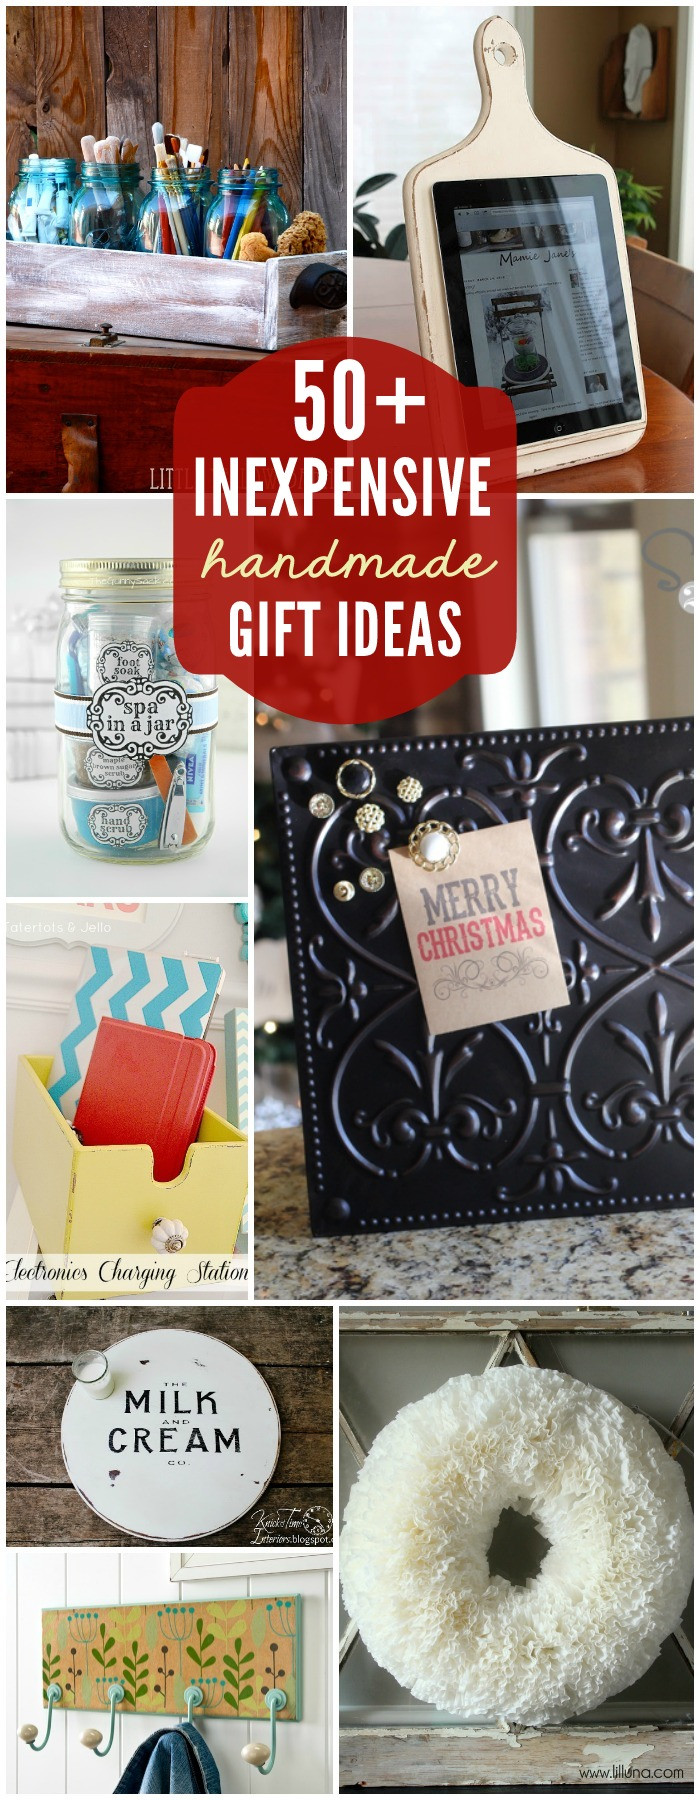 Cute DIY Christmas Gifts
 75 Gift Ideas under $5